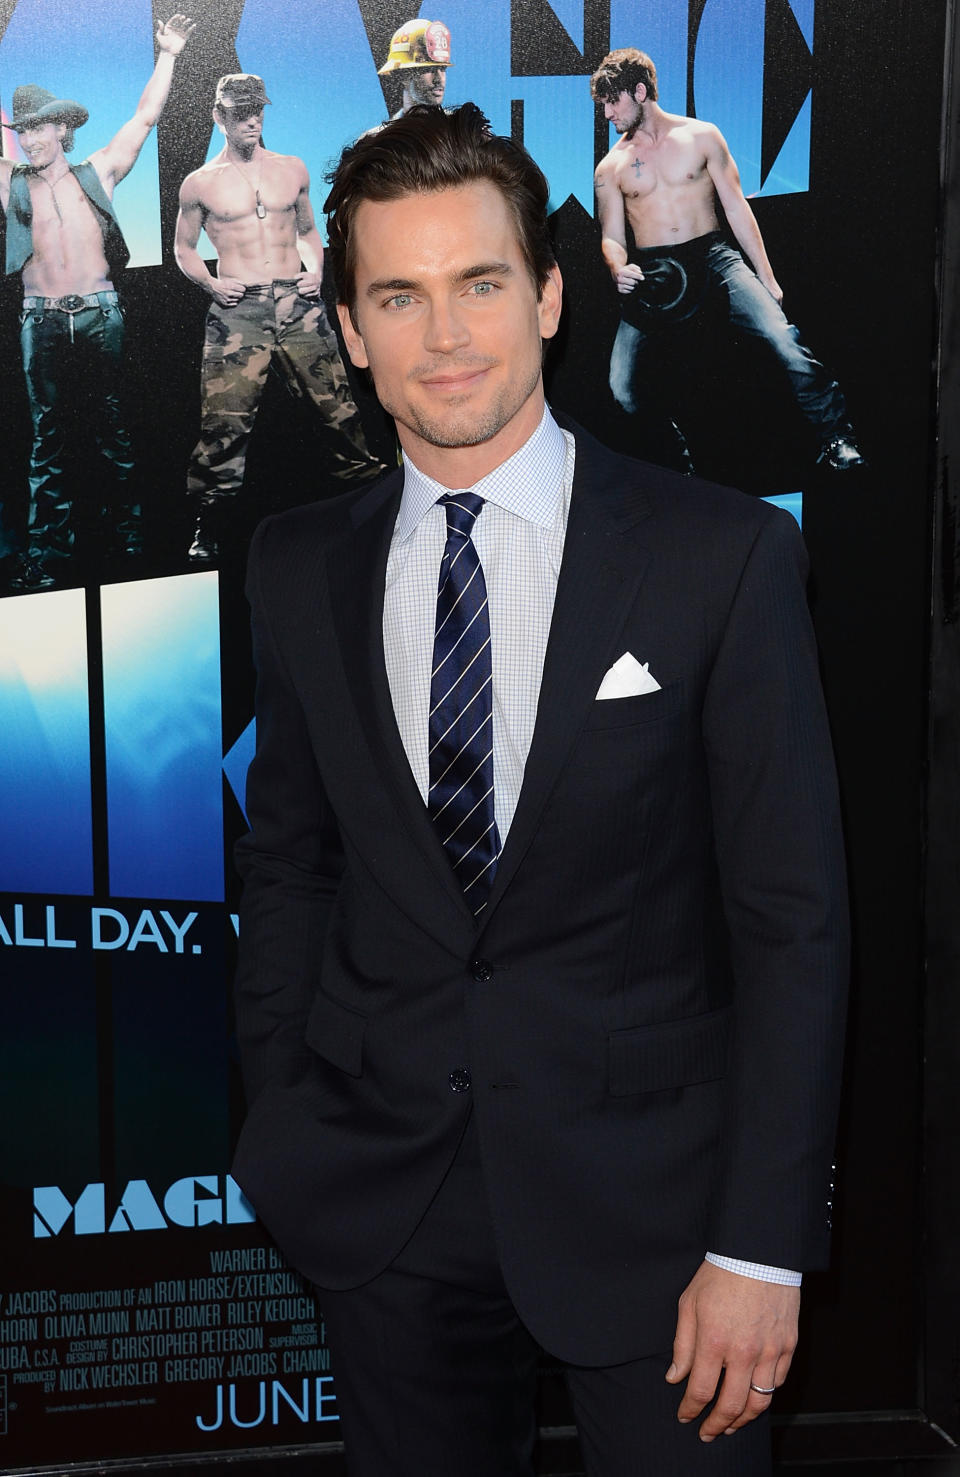 Film Independent's 2012 Los Angeles Film Festival Premiere Of Warner Bros. Pictures' "Magic Mike" - Arrivals